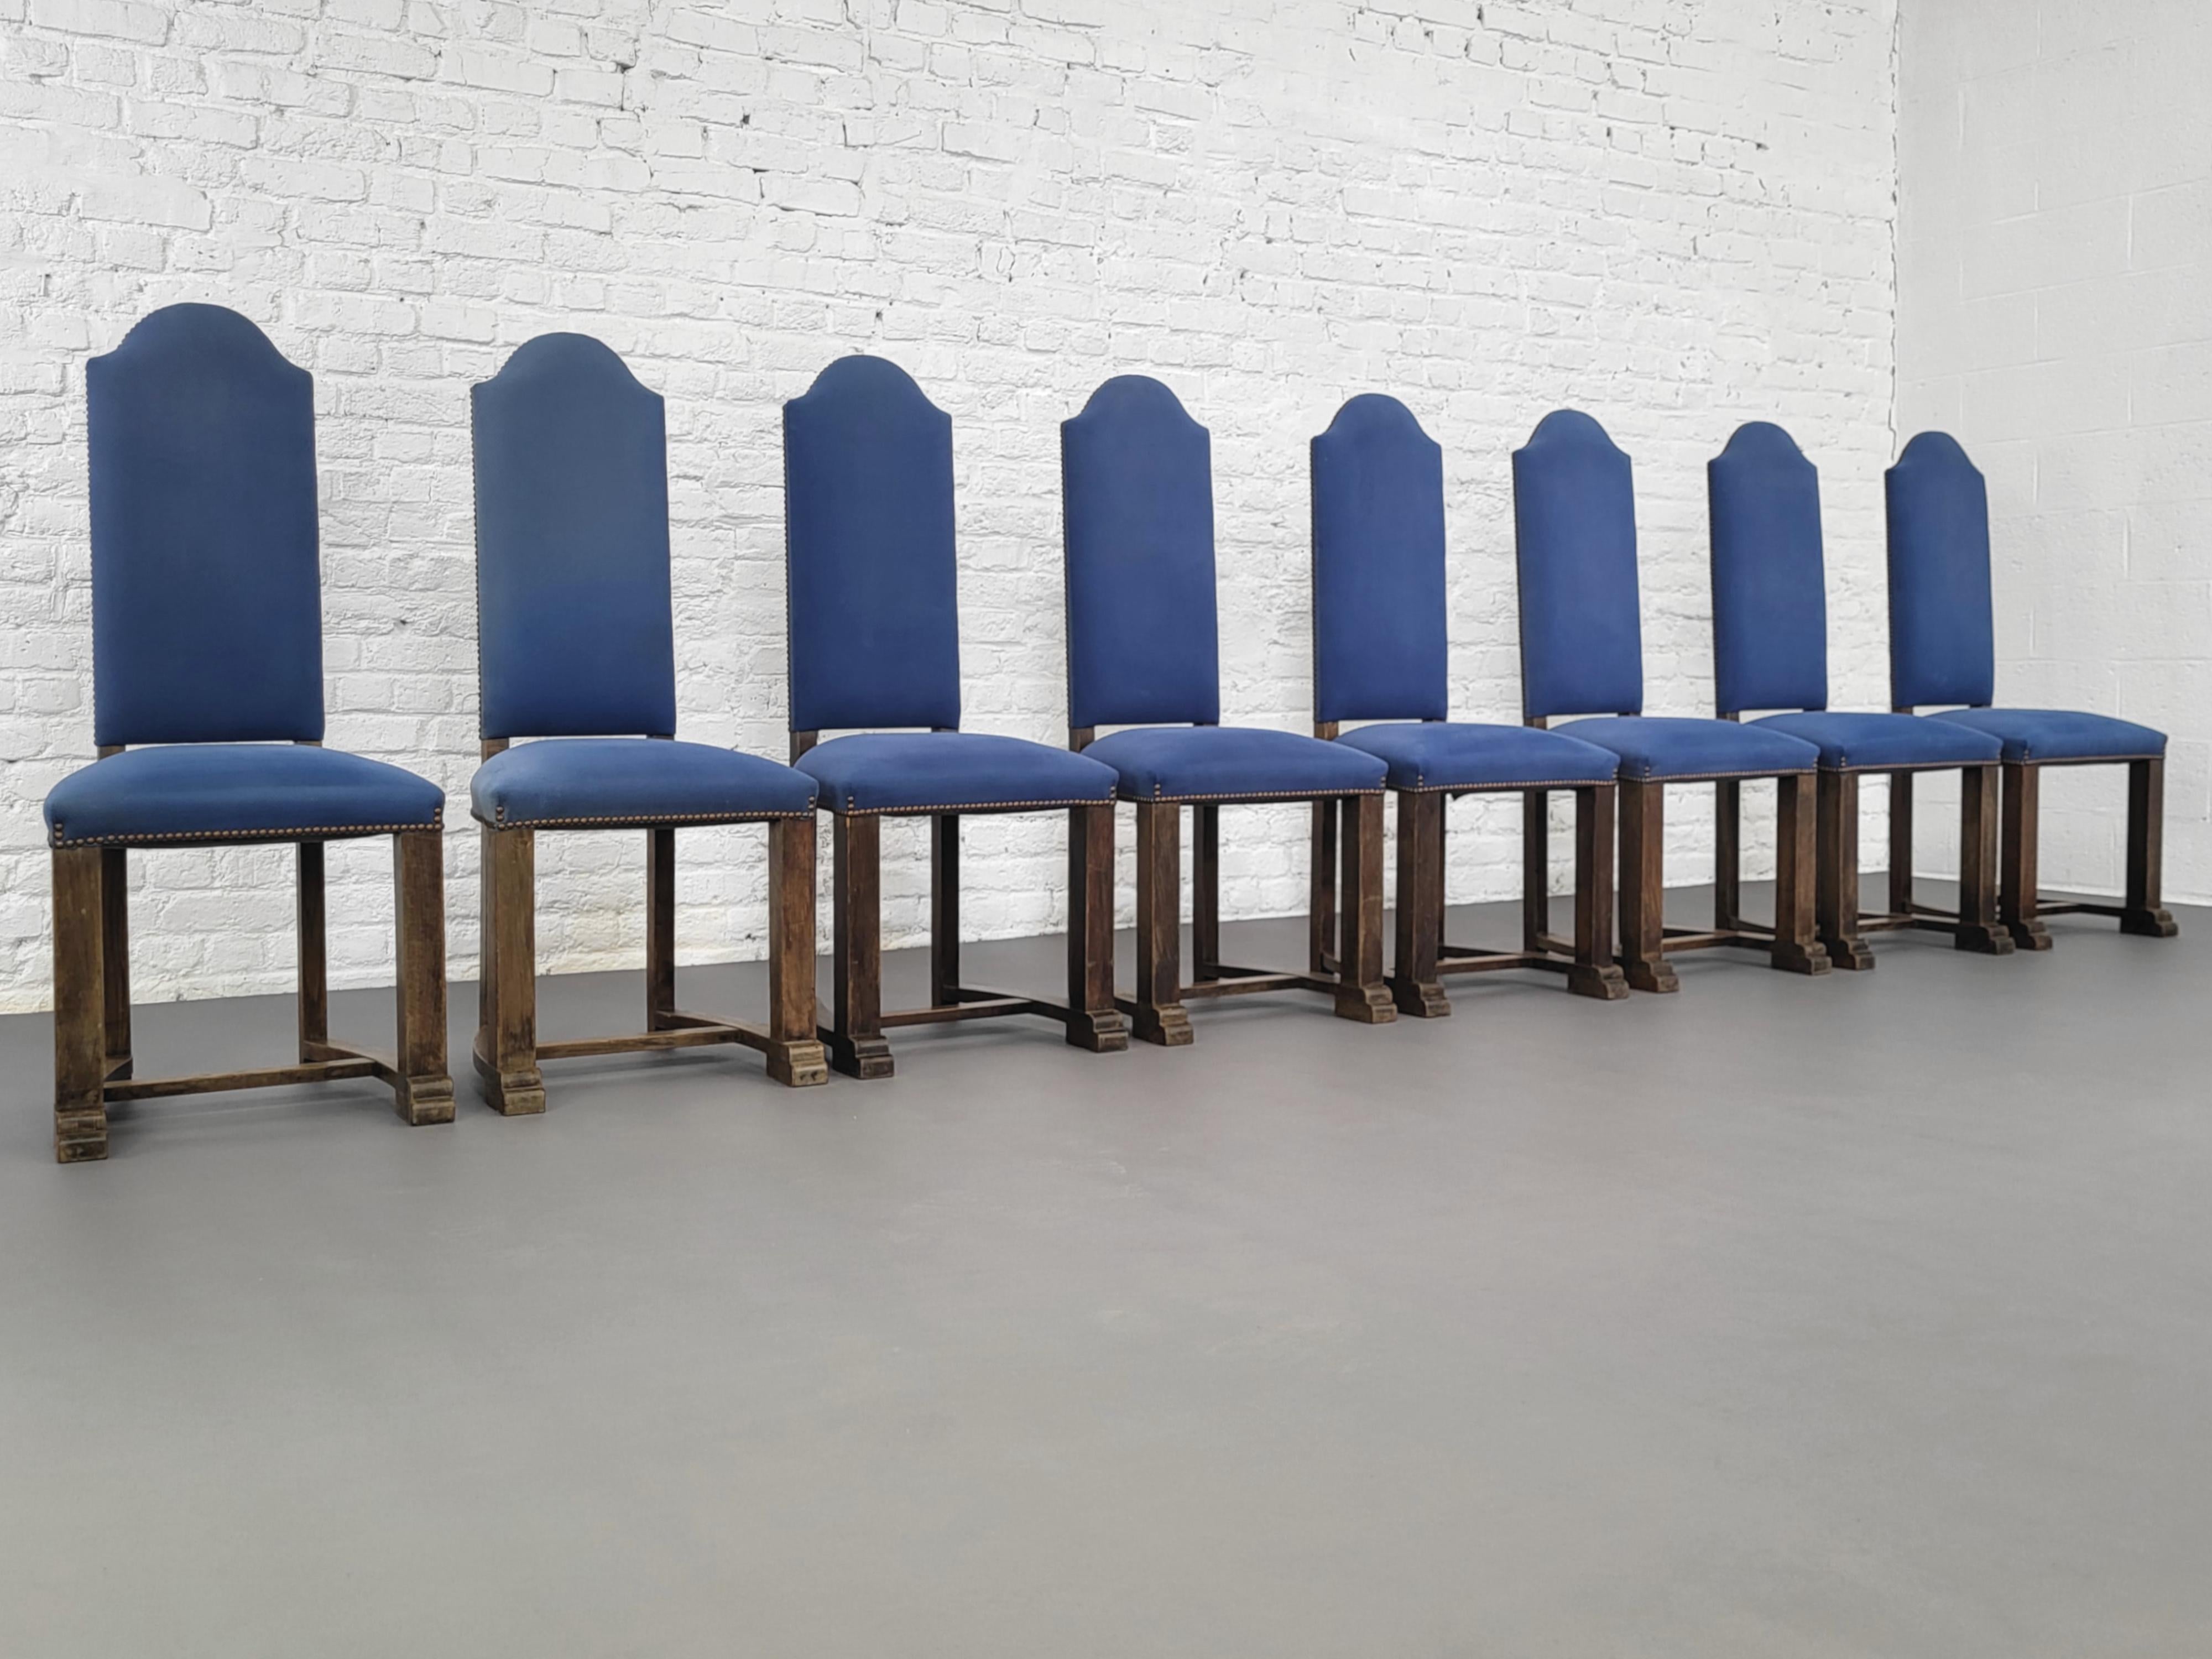 French Antic Louis XIII Style Wooden And Fabric Set of 8 Chairs composed of a curved and sculpted wooden high back structure adorned with blue fabric.